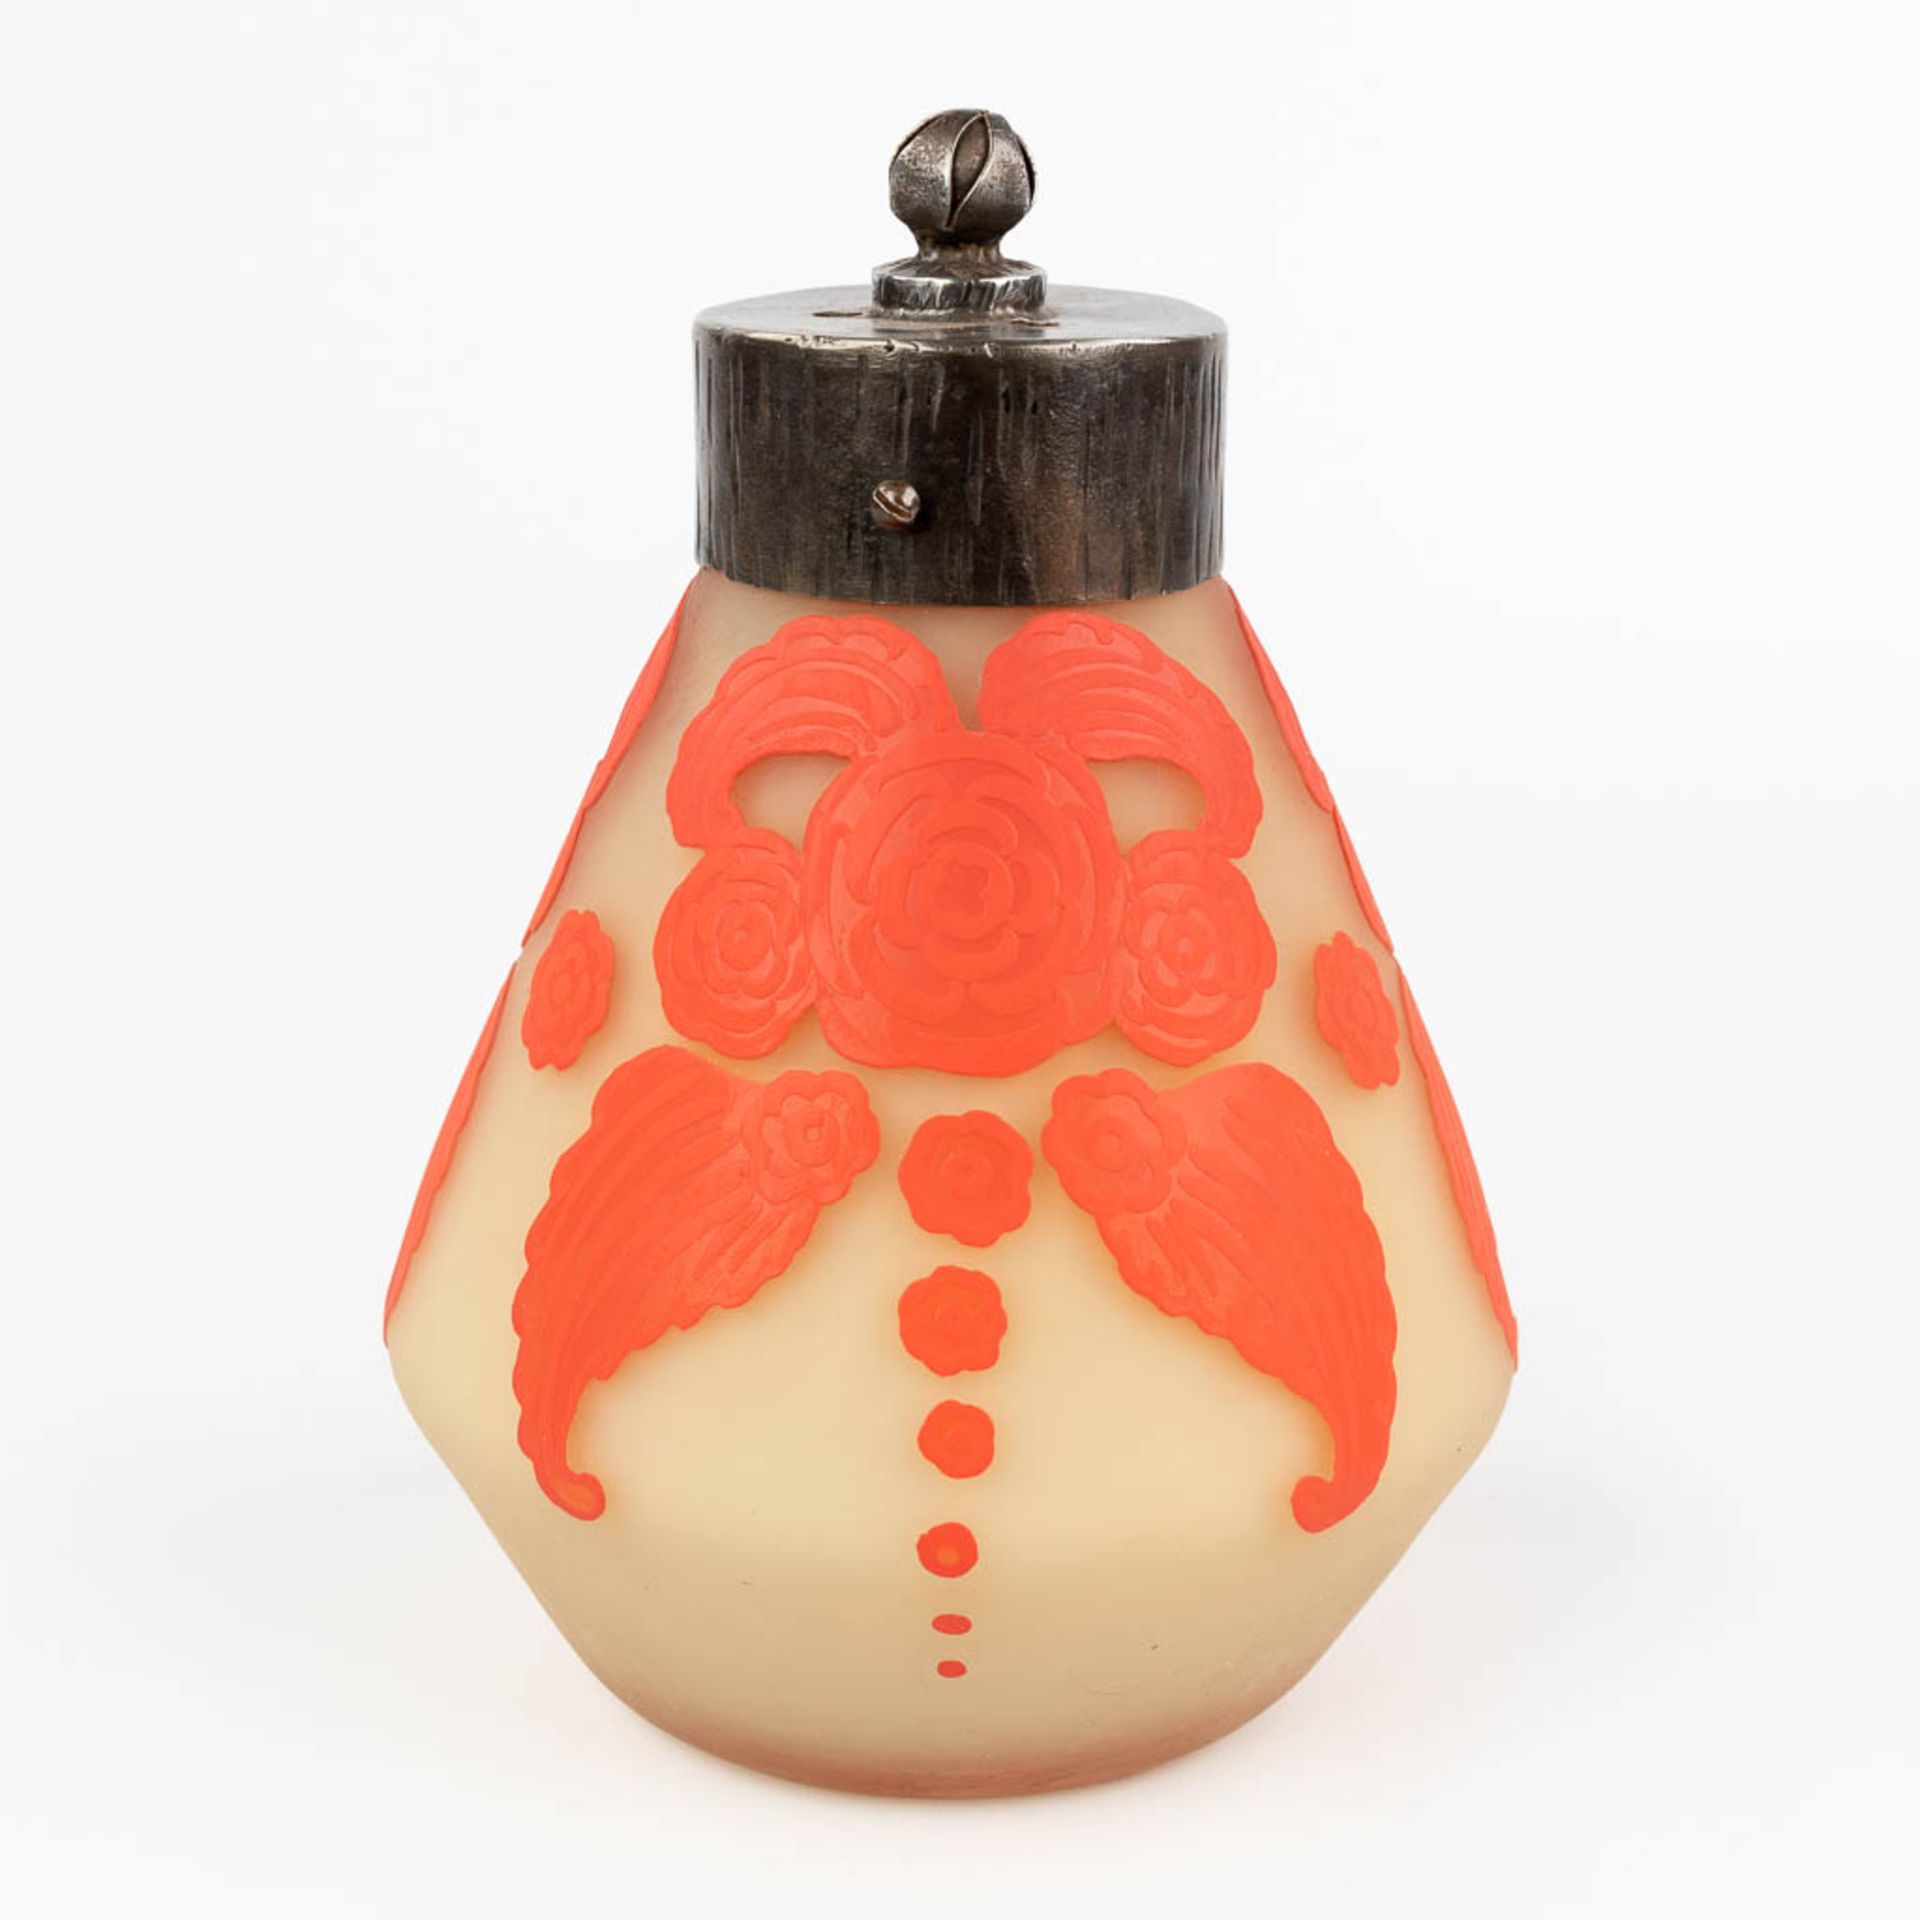 An exceptional 'Veilleuse' table lamp, marked Muller Frres LunŽville. (H:24 x D:17 cm)